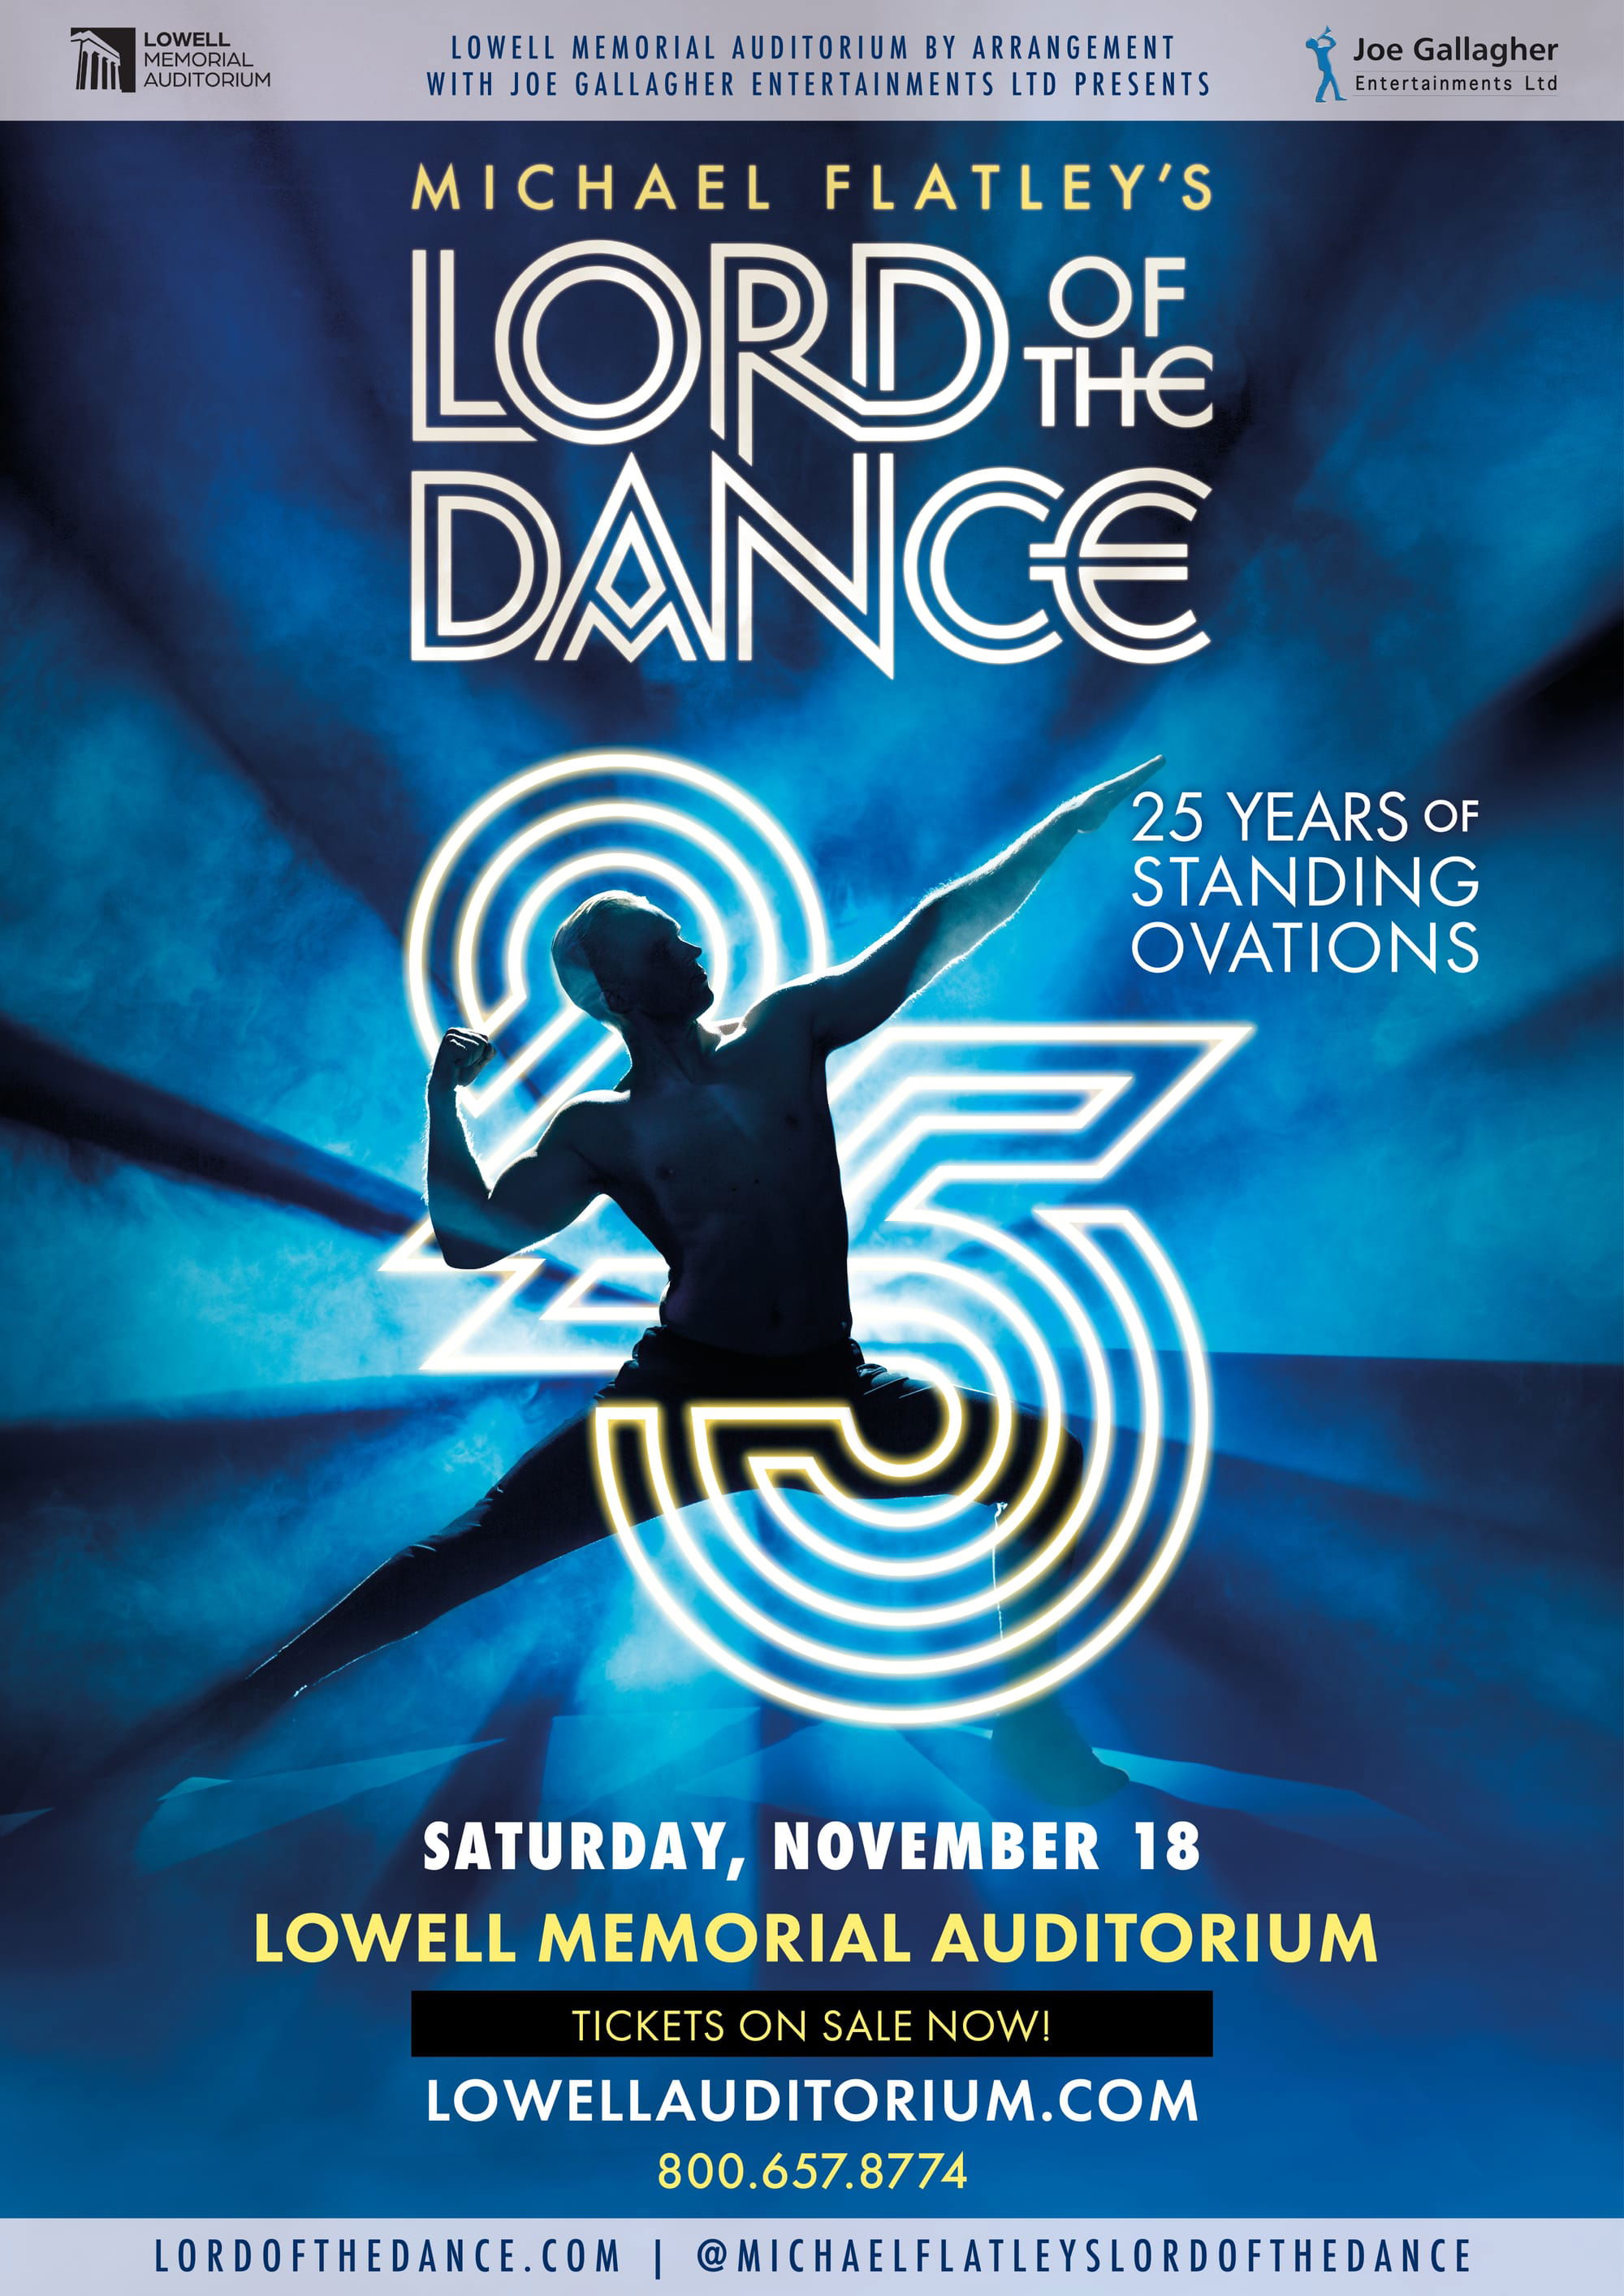 Michael Flatley's "Lord of the Dance" comes to Lowell Memorial Auditorium (Lowell, MA.)